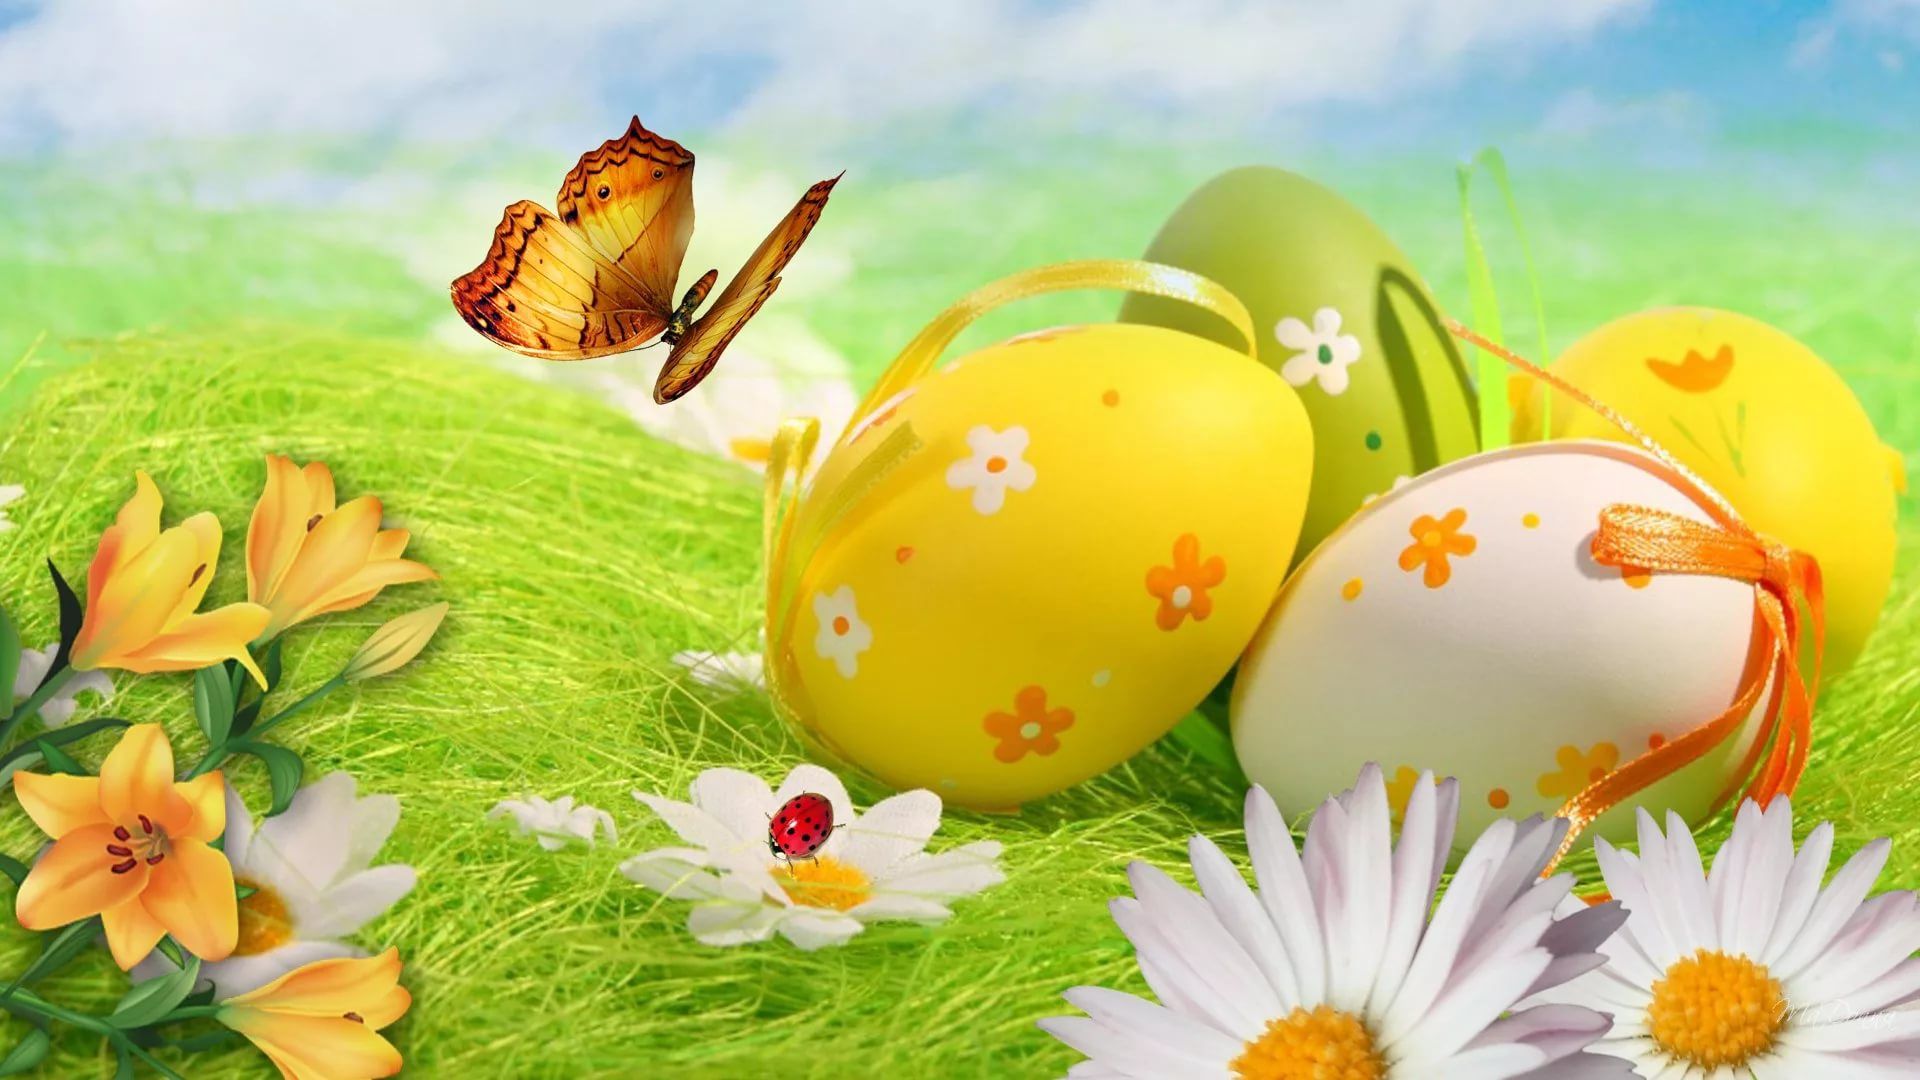 Happy Easter background wallpaper